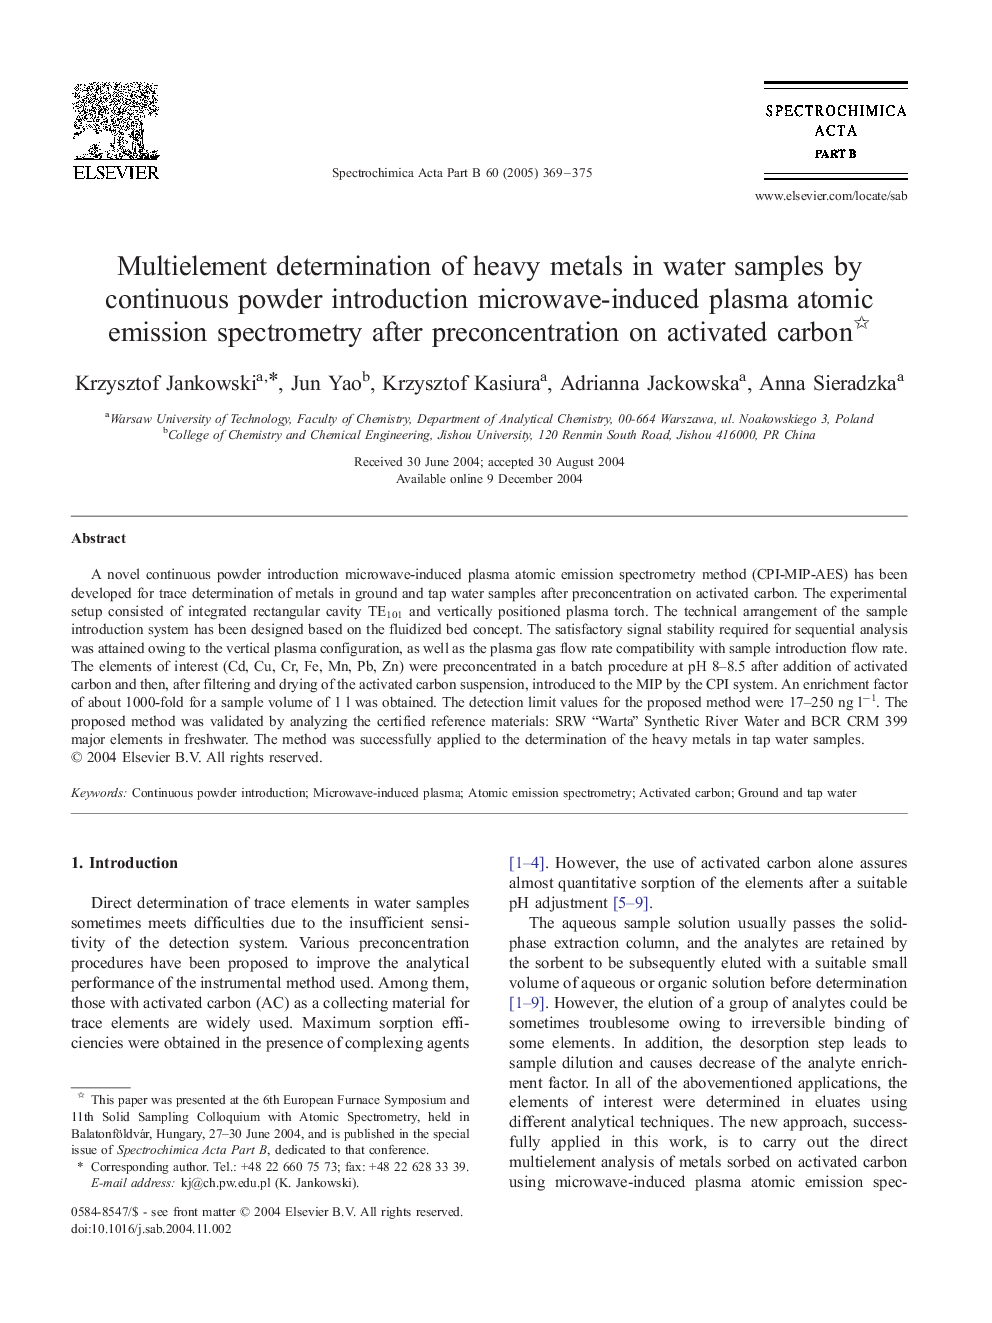 Multielement determination of heavy metals in water samples by continuous powder introduction microwave-induced plasma atomic emission spectrometry after preconcentration on activated carbon